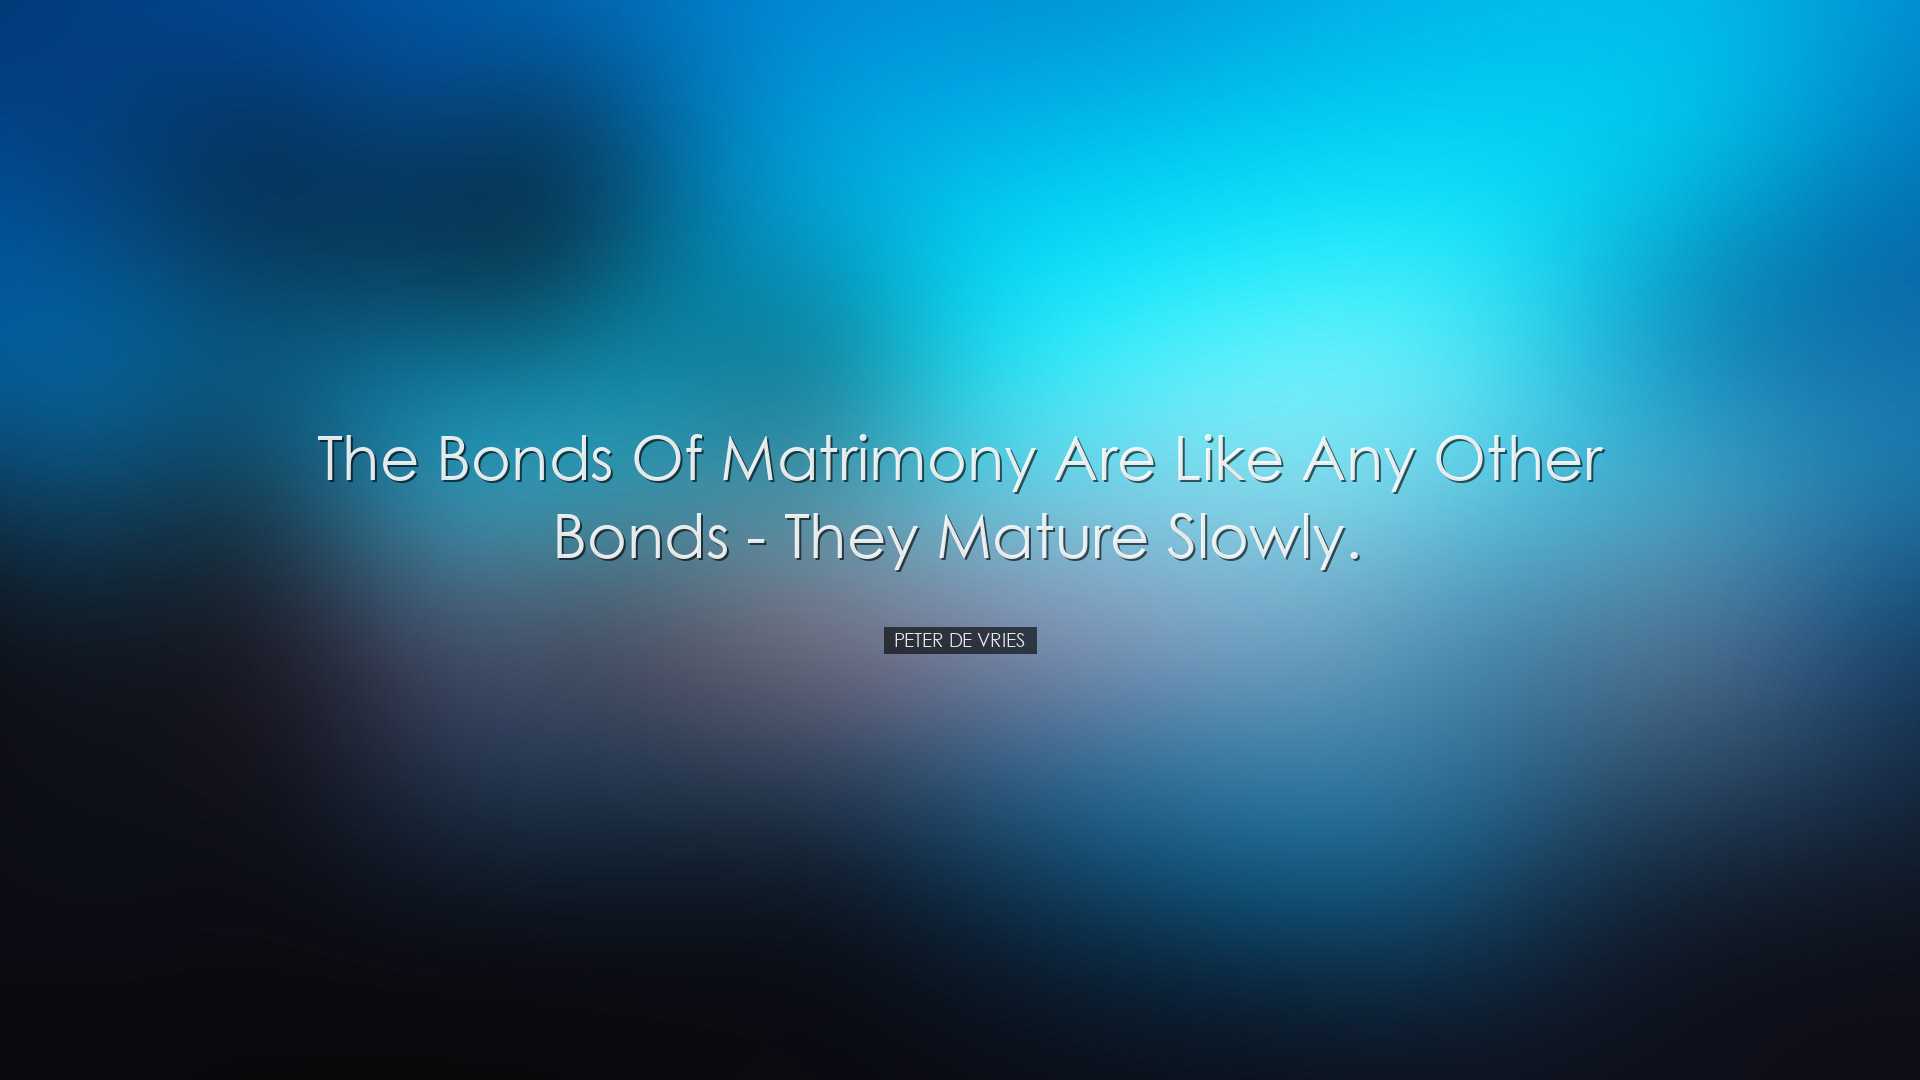 The bonds of matrimony are like any other bonds - they mature slow